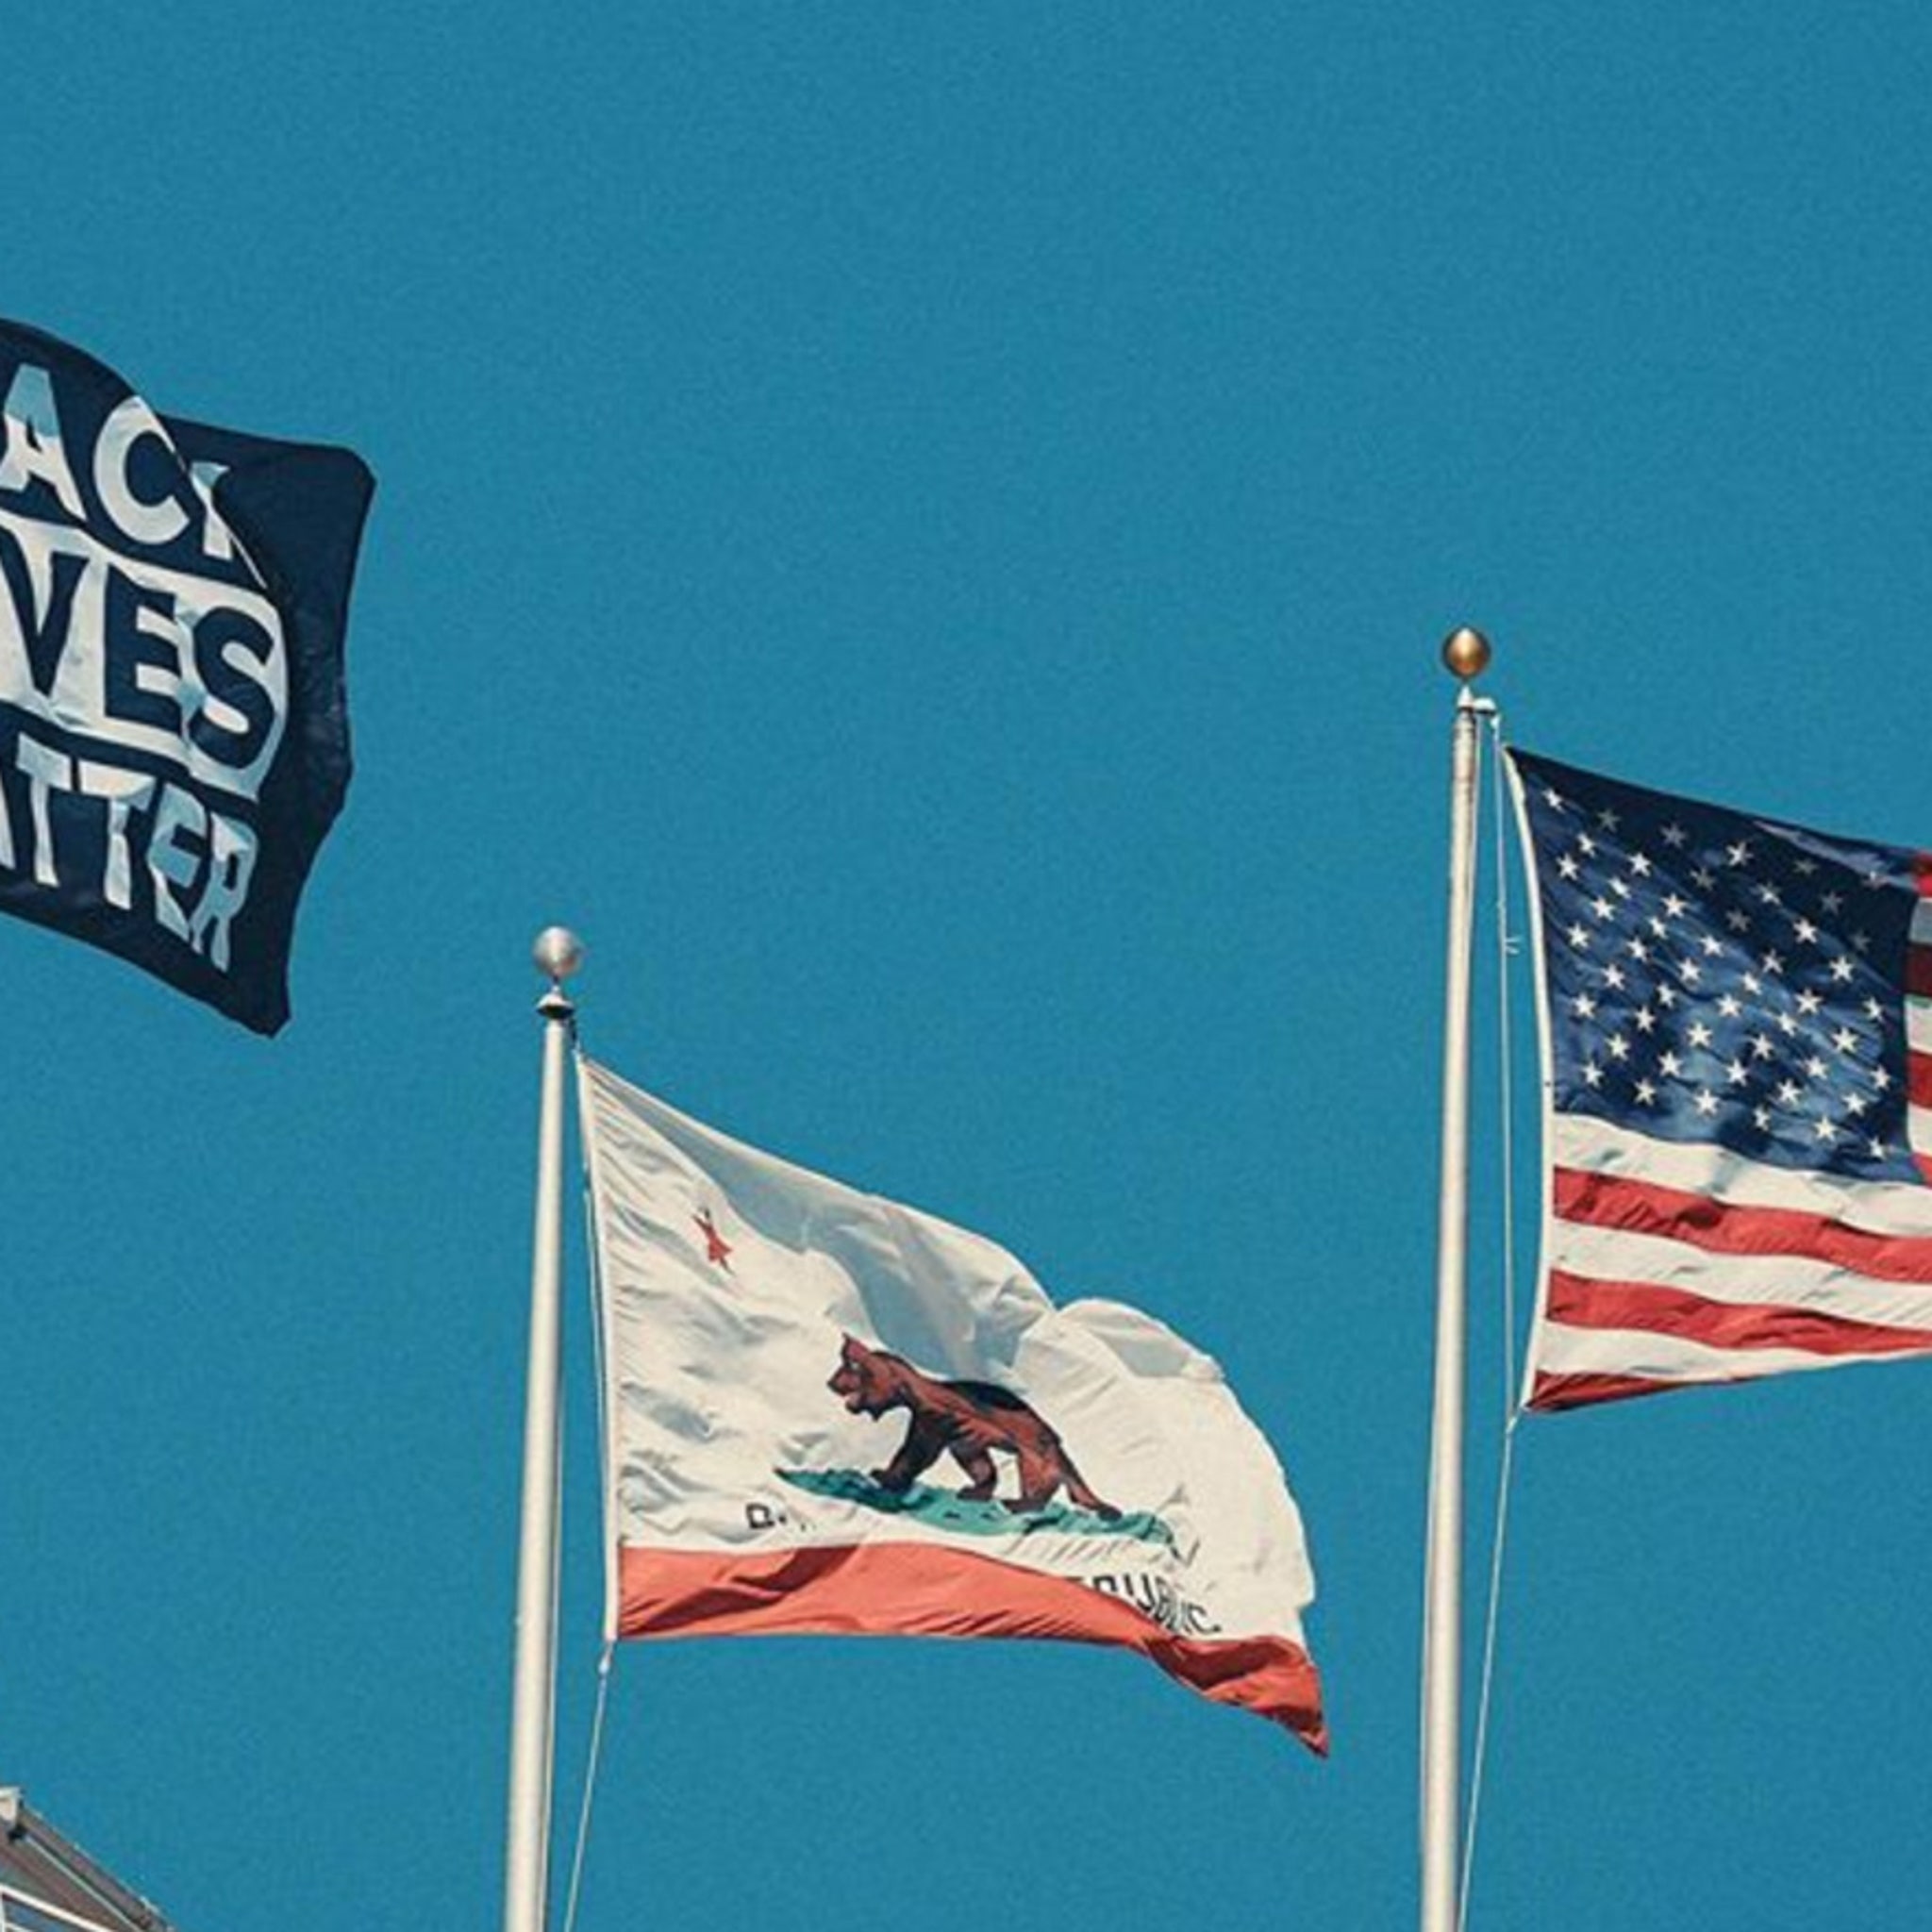 SF 49ers Fly Black Lives Matter Flag At Levi's Stadium, 'Justice For All'